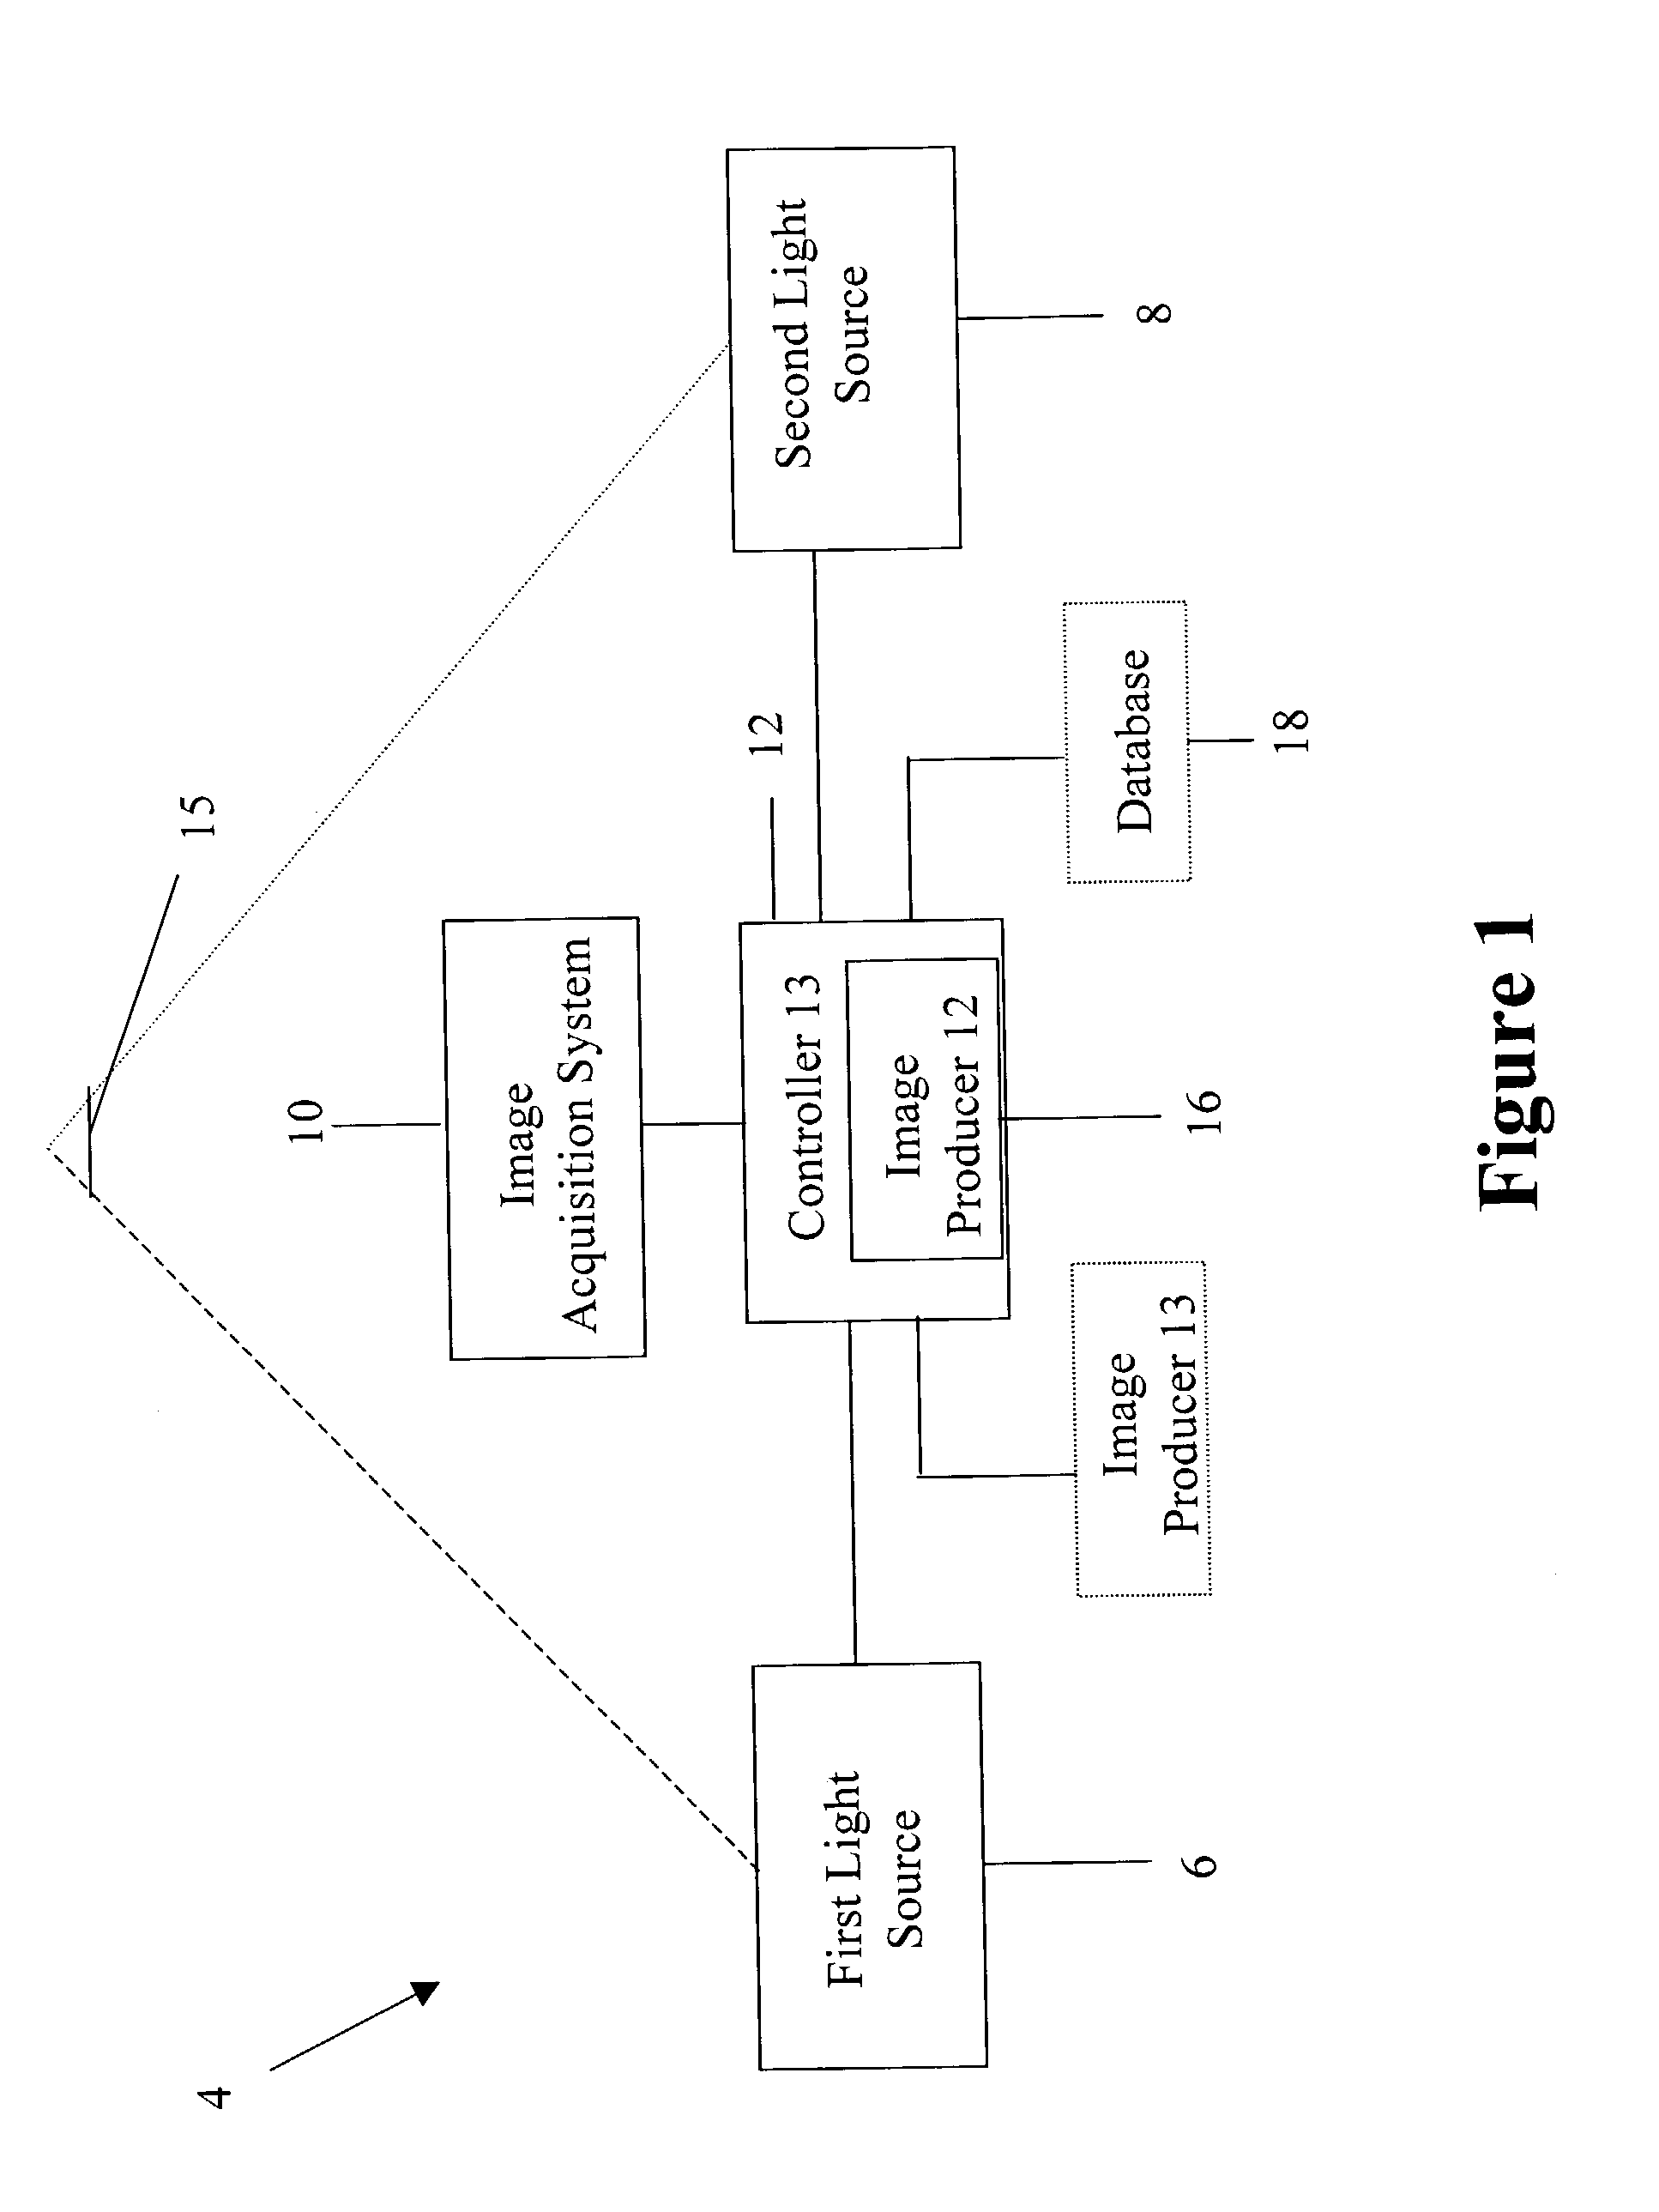 Systems and methods for forming a reduced-glare image